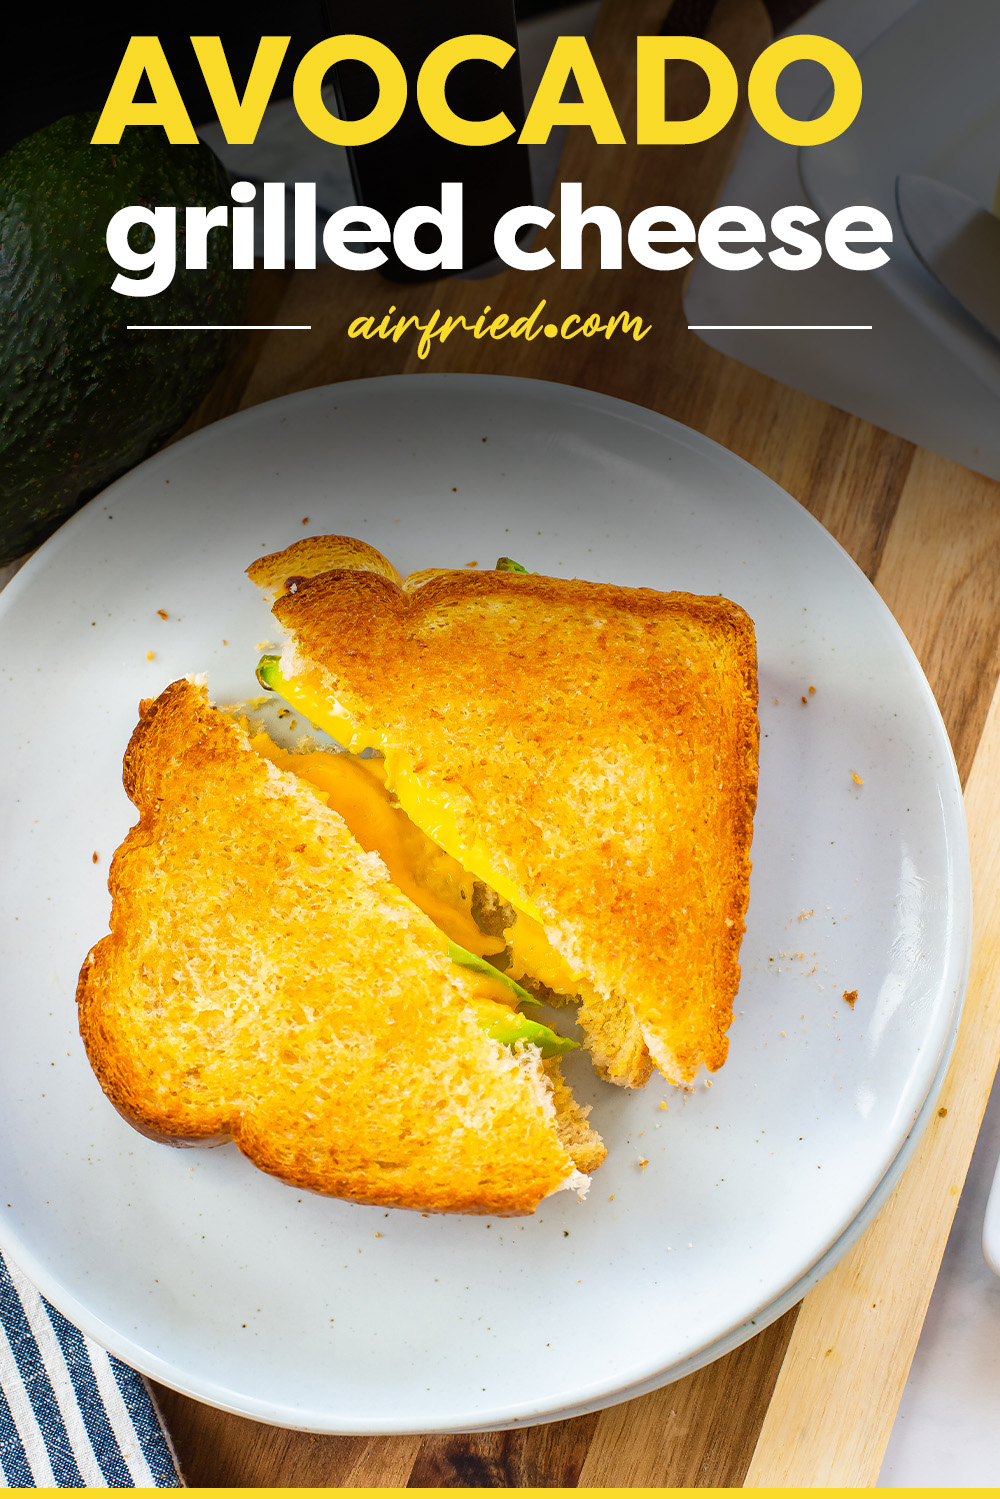 This simple grilled cheese gets a tasty make over with the addition of avocado slices!